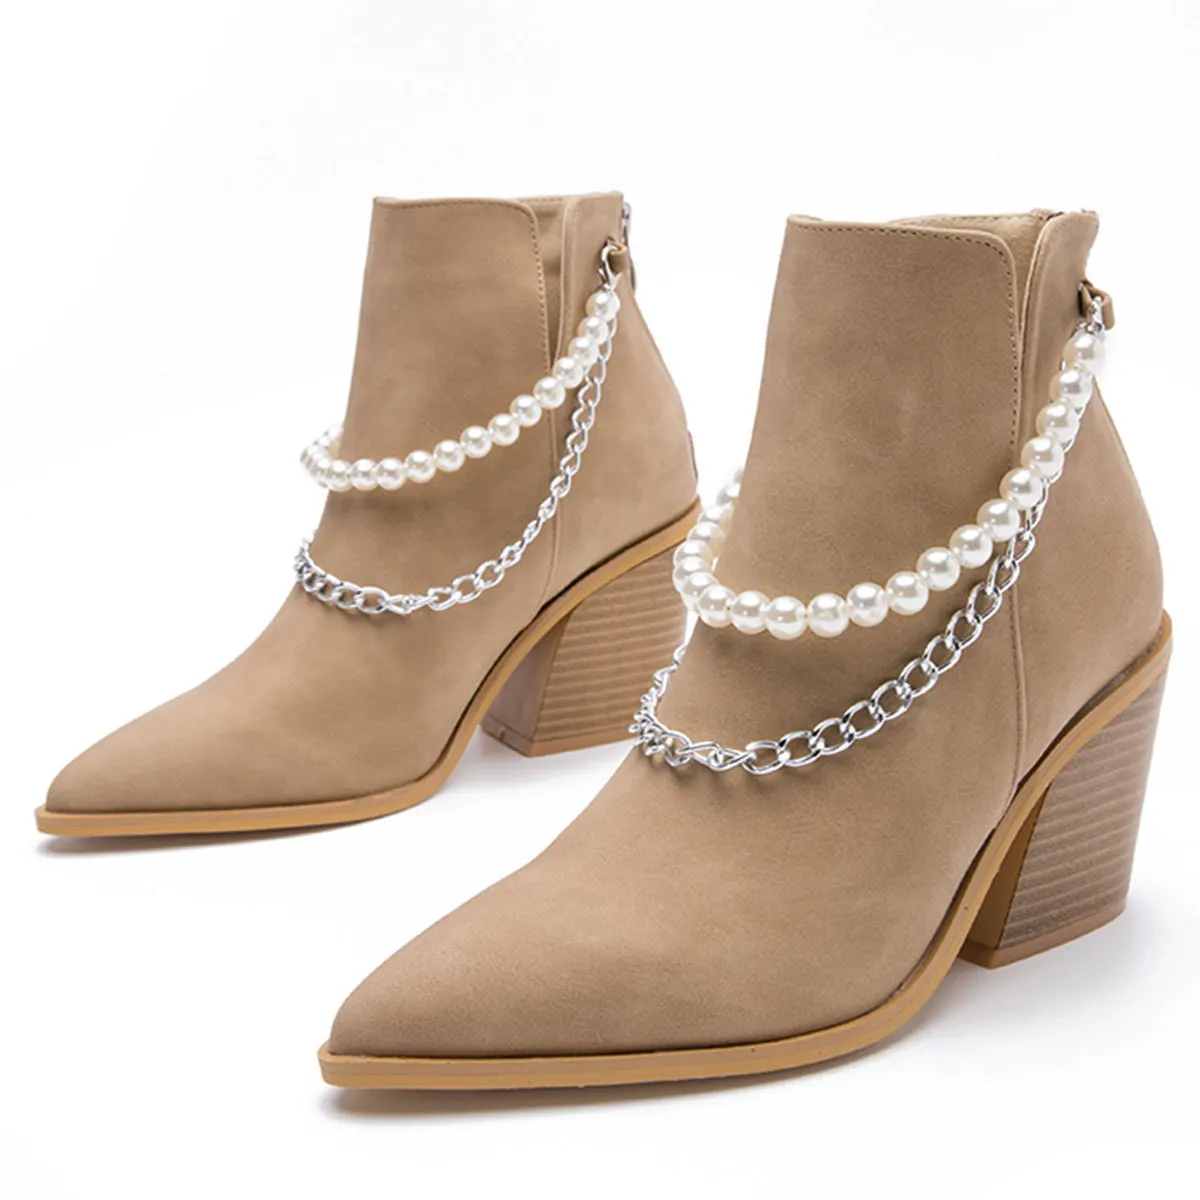 2022 Autumn And Winter New Large Size British Wind Velvet Solid Color Suede Pearl Chain Decoration Fashion Ladies High Heel Boot